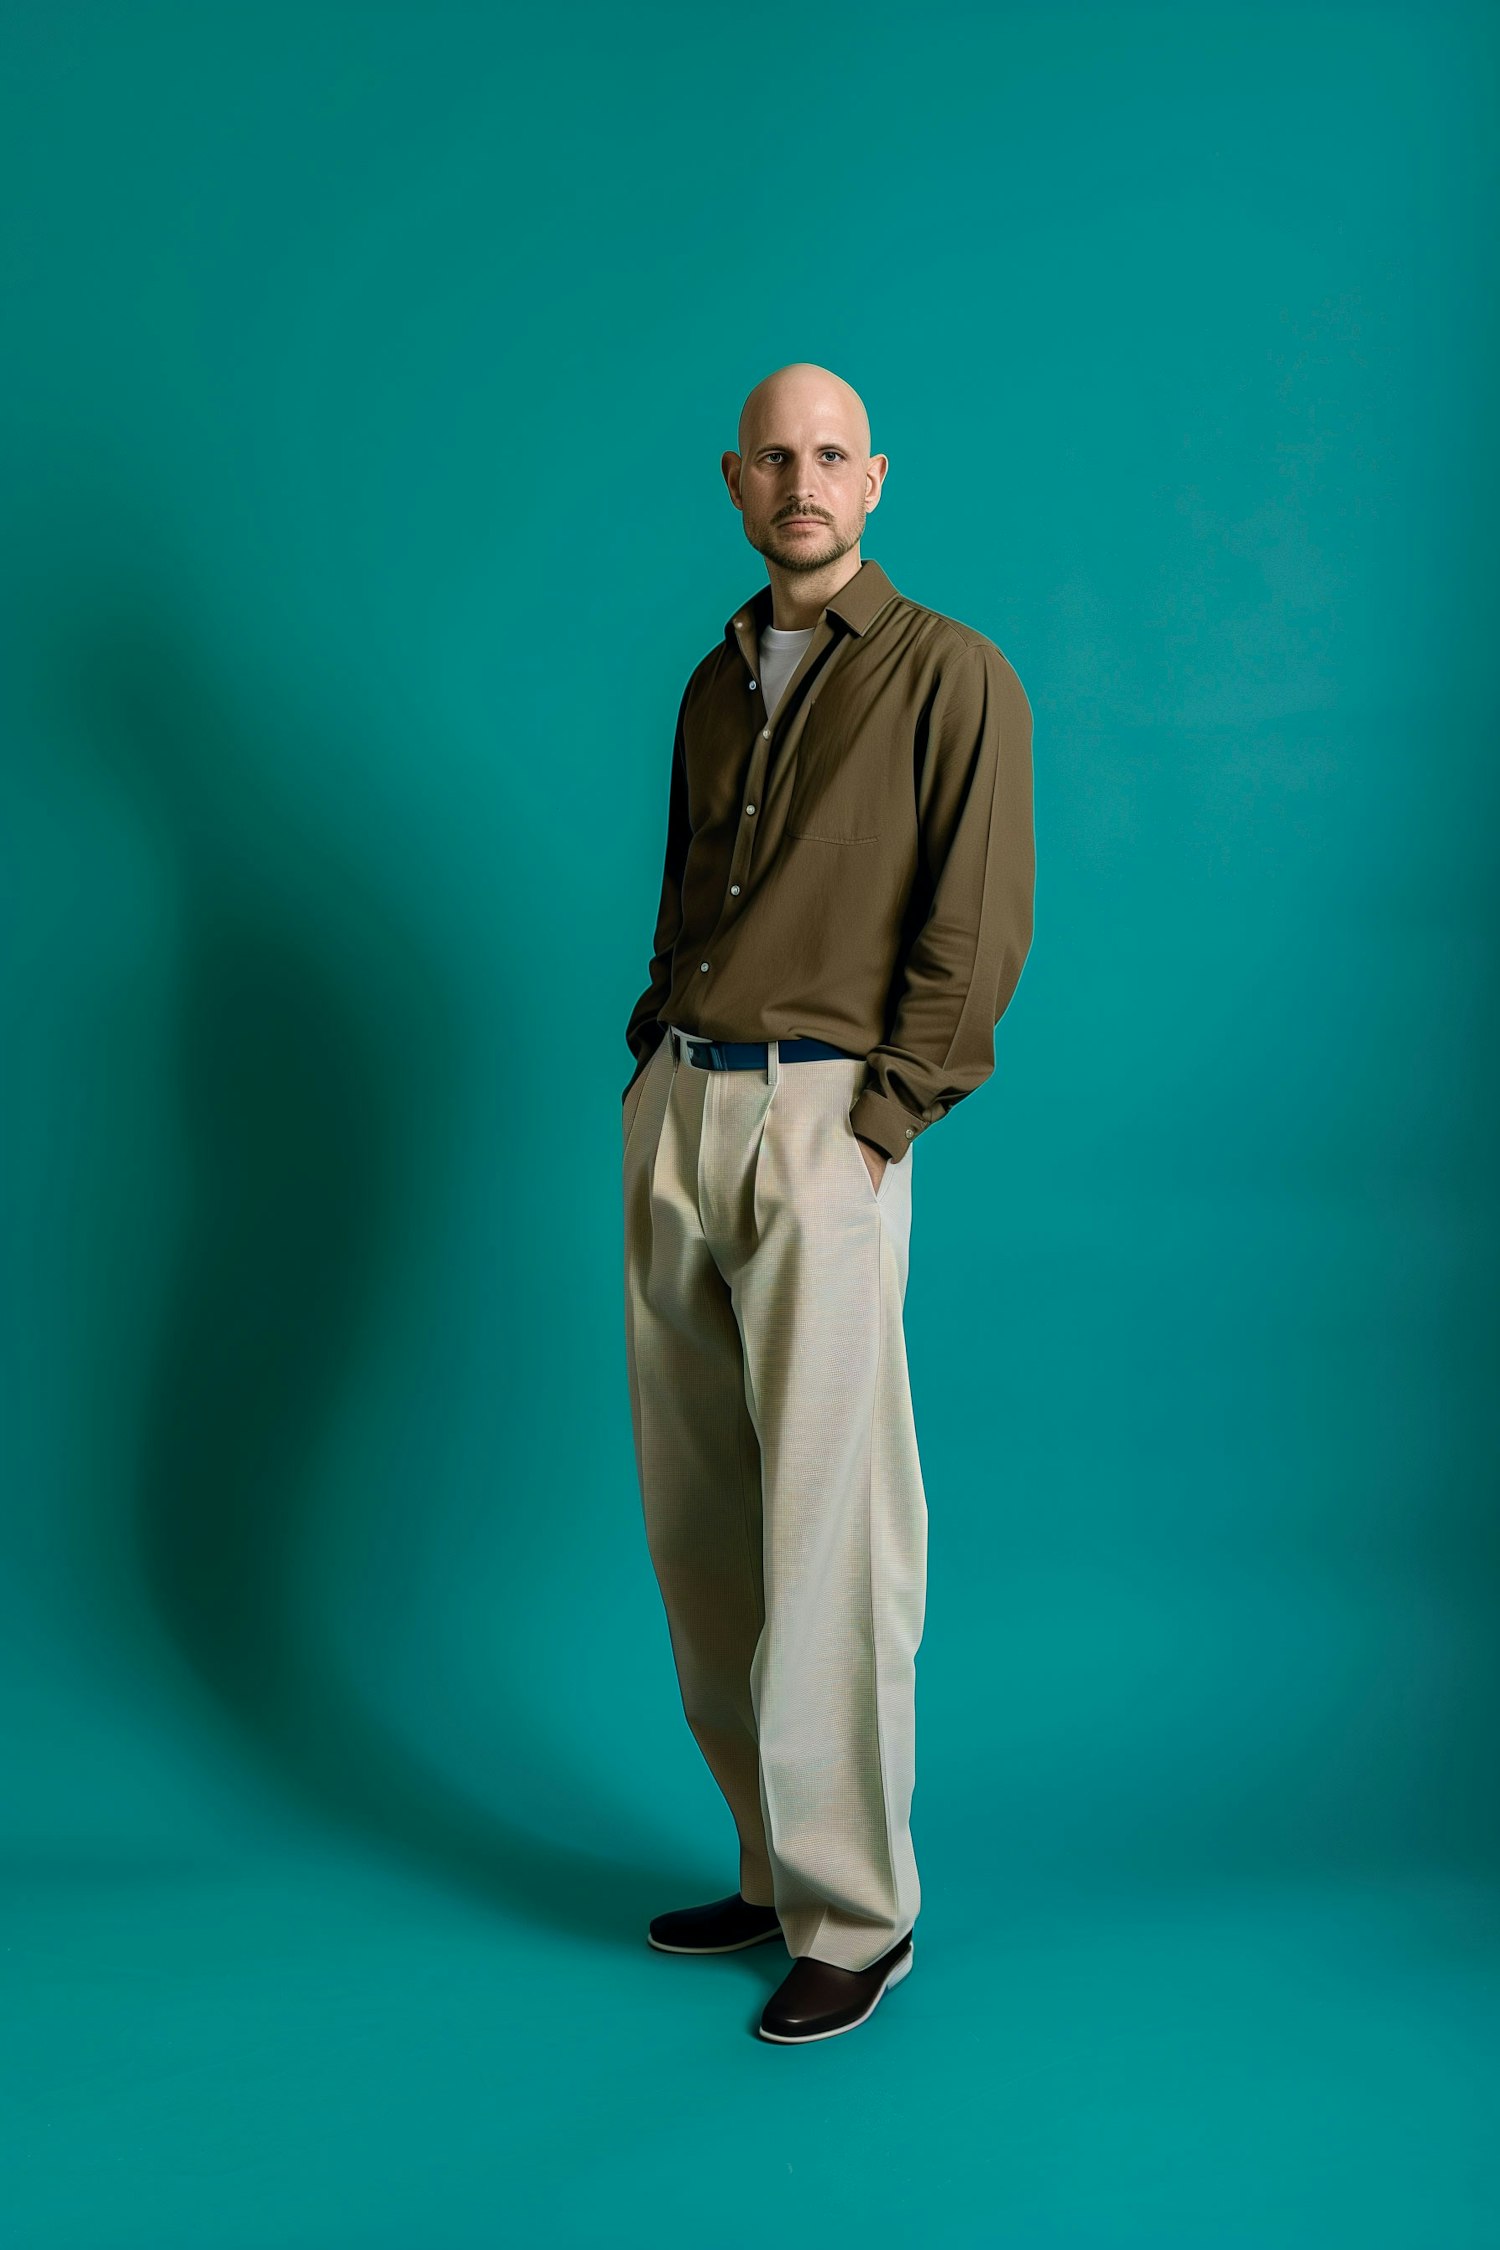 Serene Man in Earth Tones against Teal Background